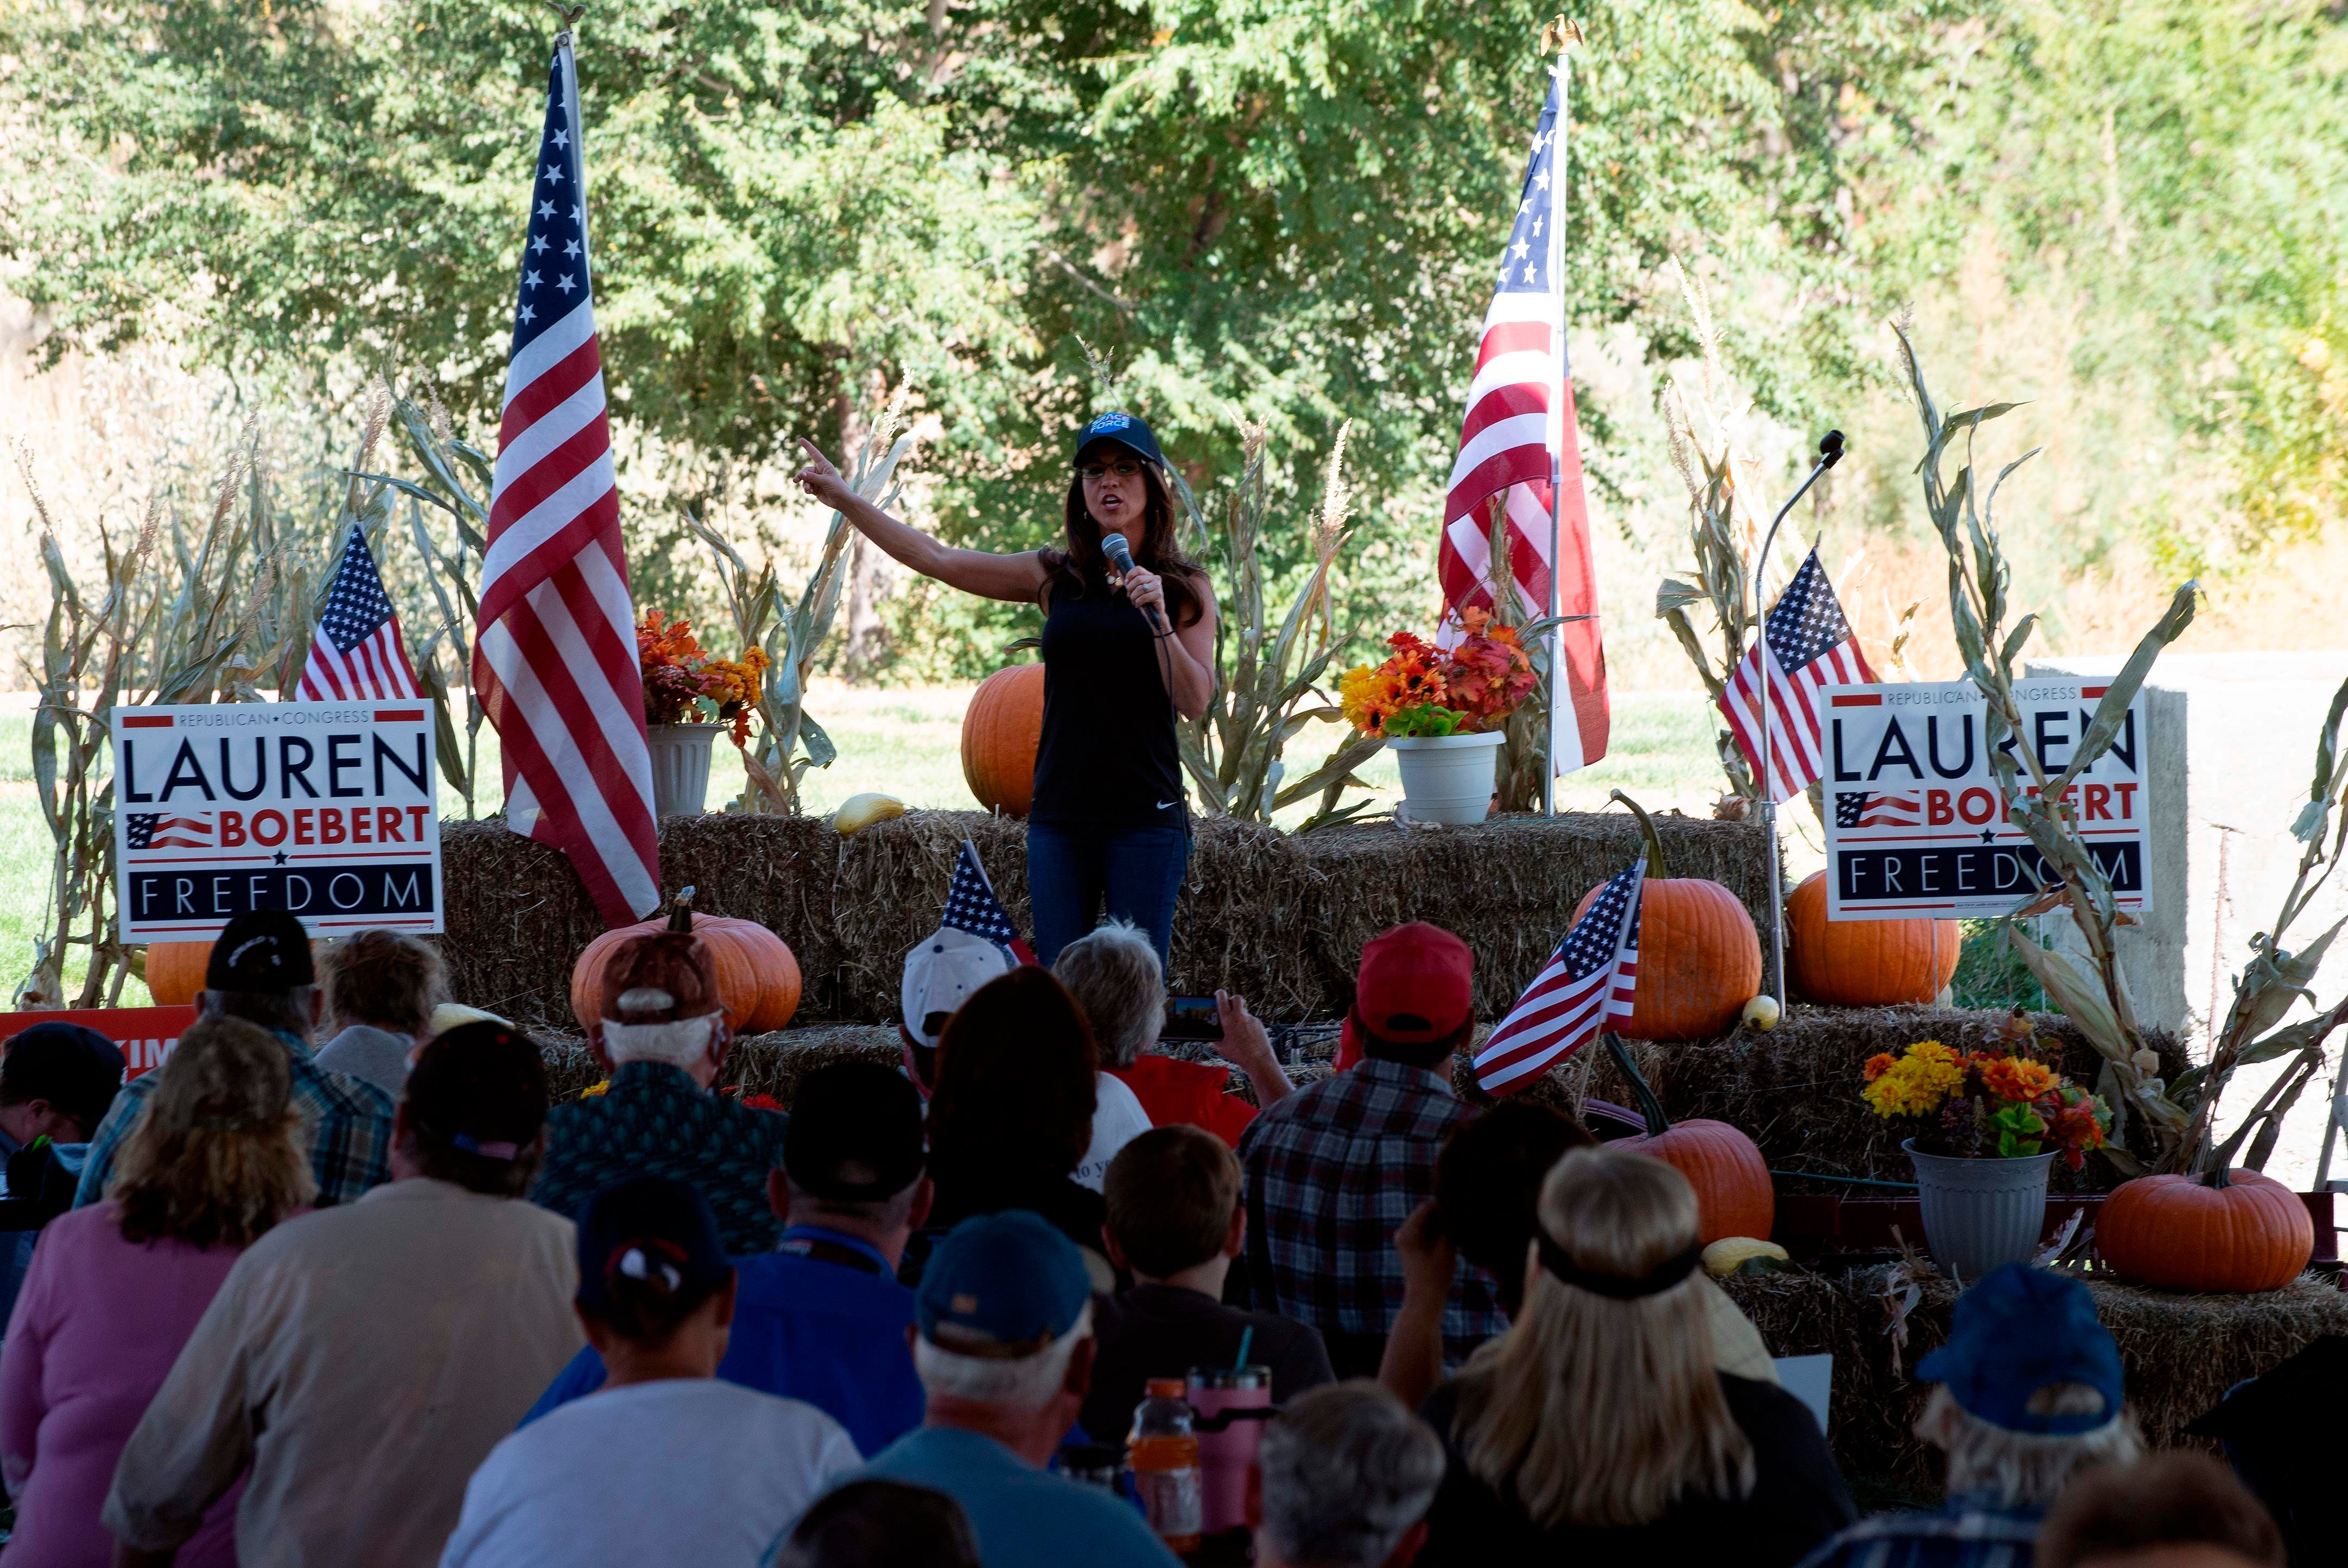 Lauren Boebert, the Republican candidate for the US House of Representatives seat in Colorado’s 3rd Congressional District, holds a rally on 10 October.